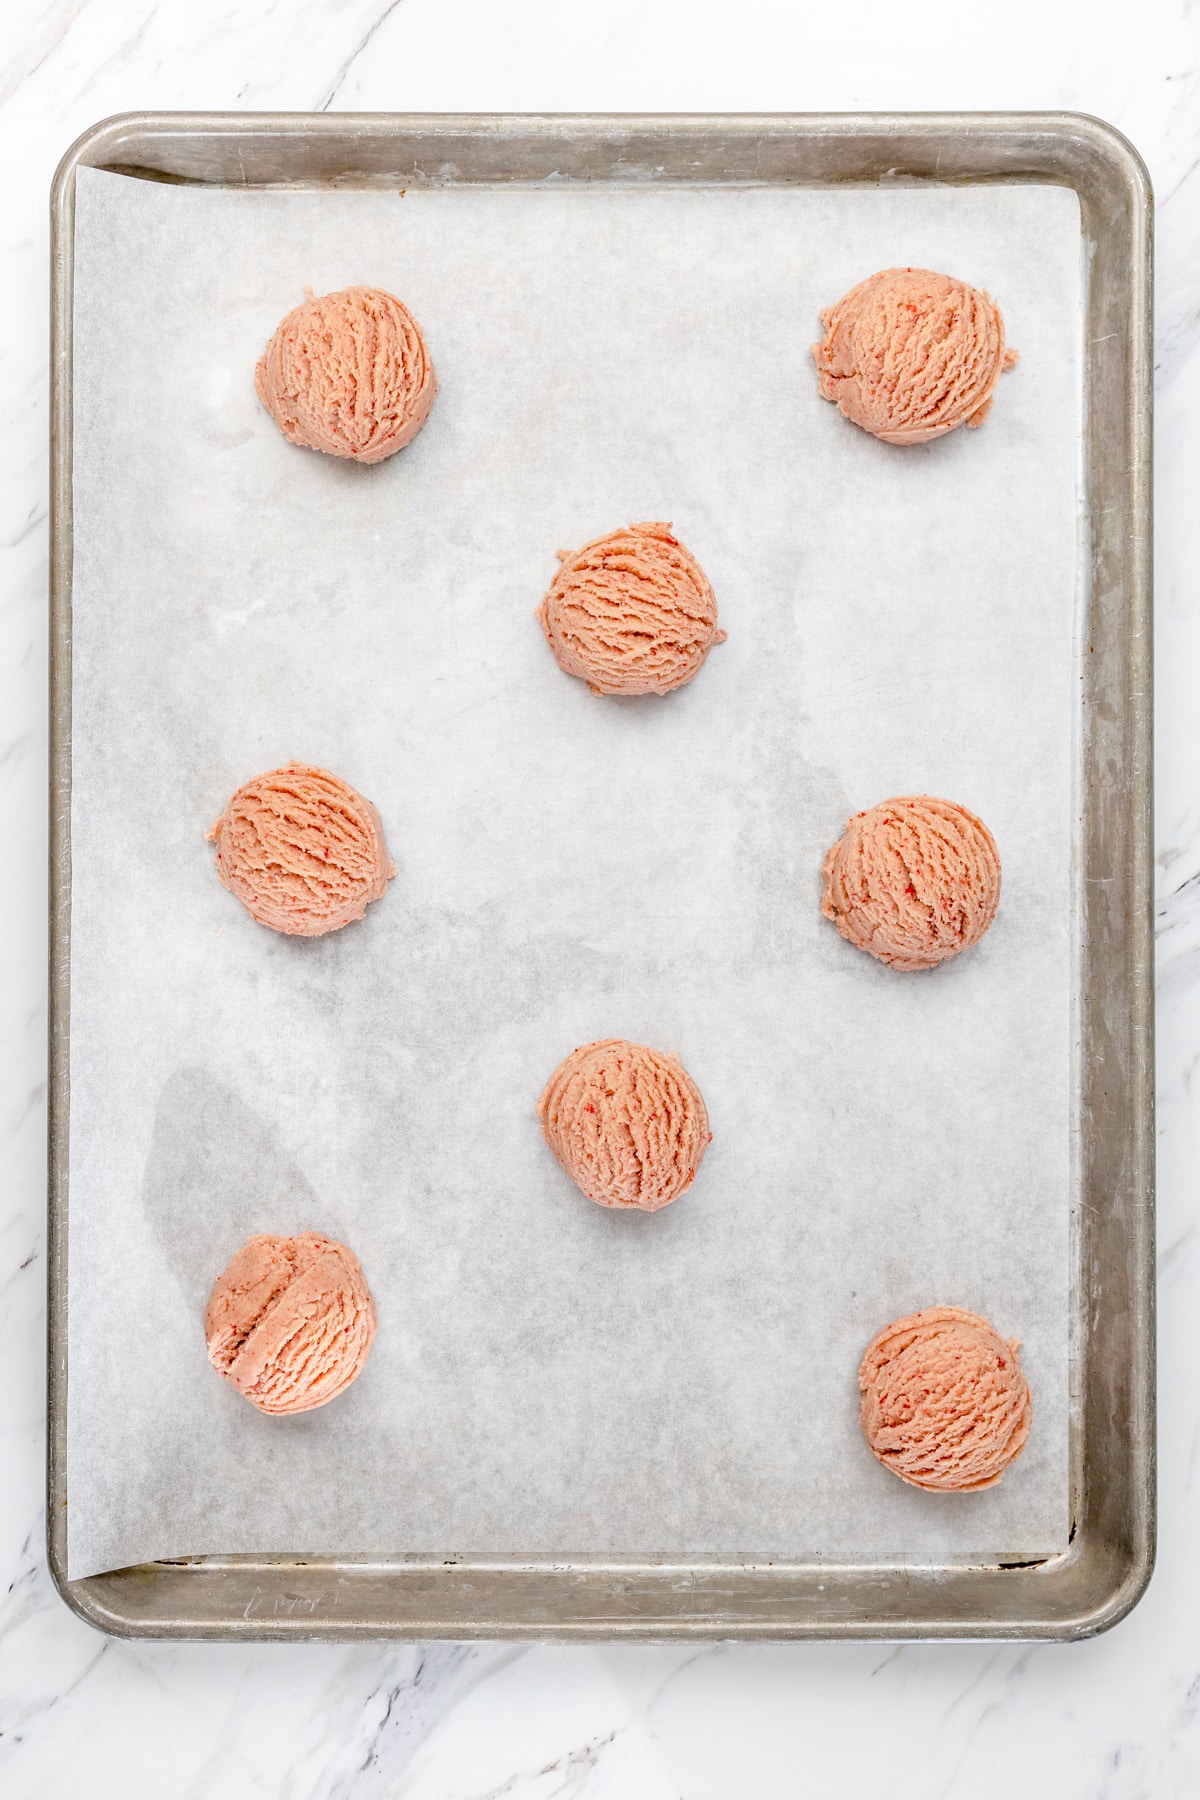 Top view of a baking tray lined with strawberry sugar cookie dough balls. 